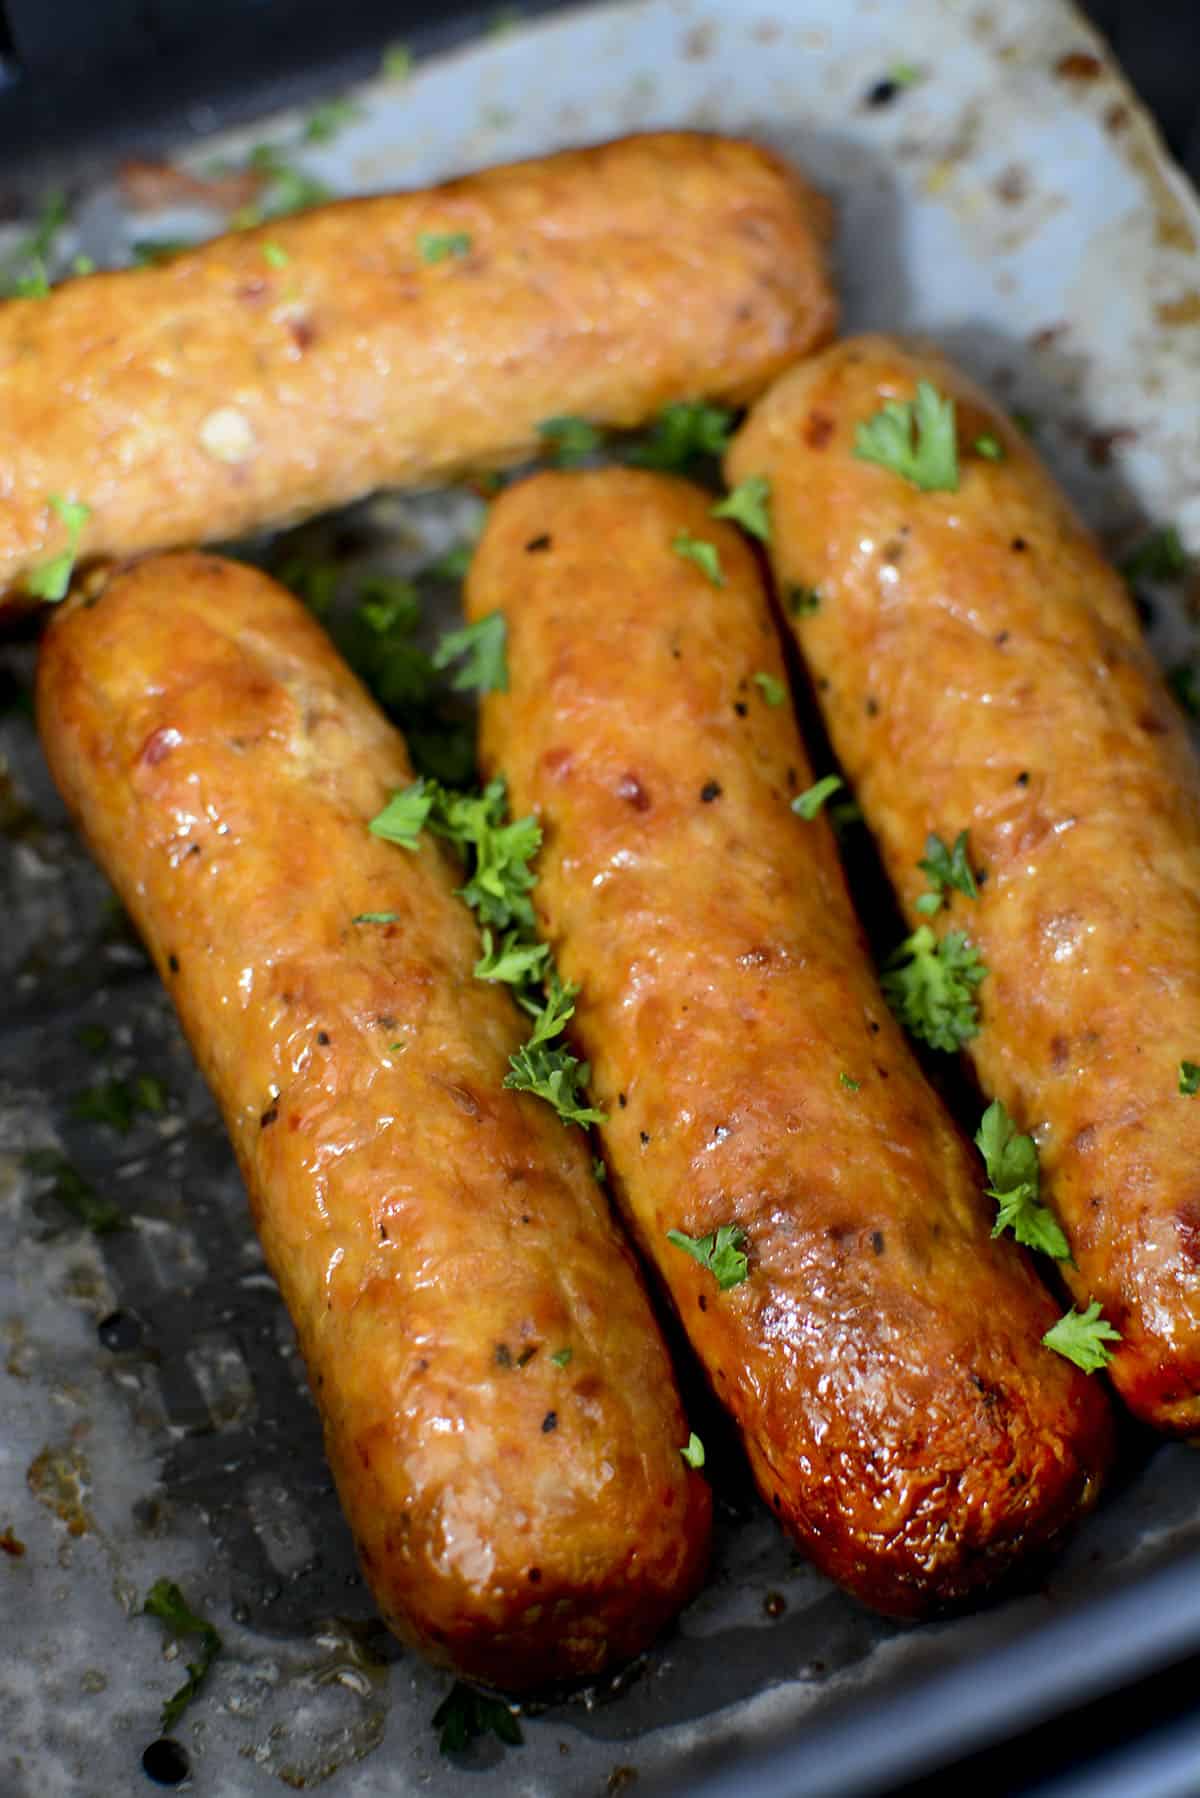 Four Air fried chicken sausages.